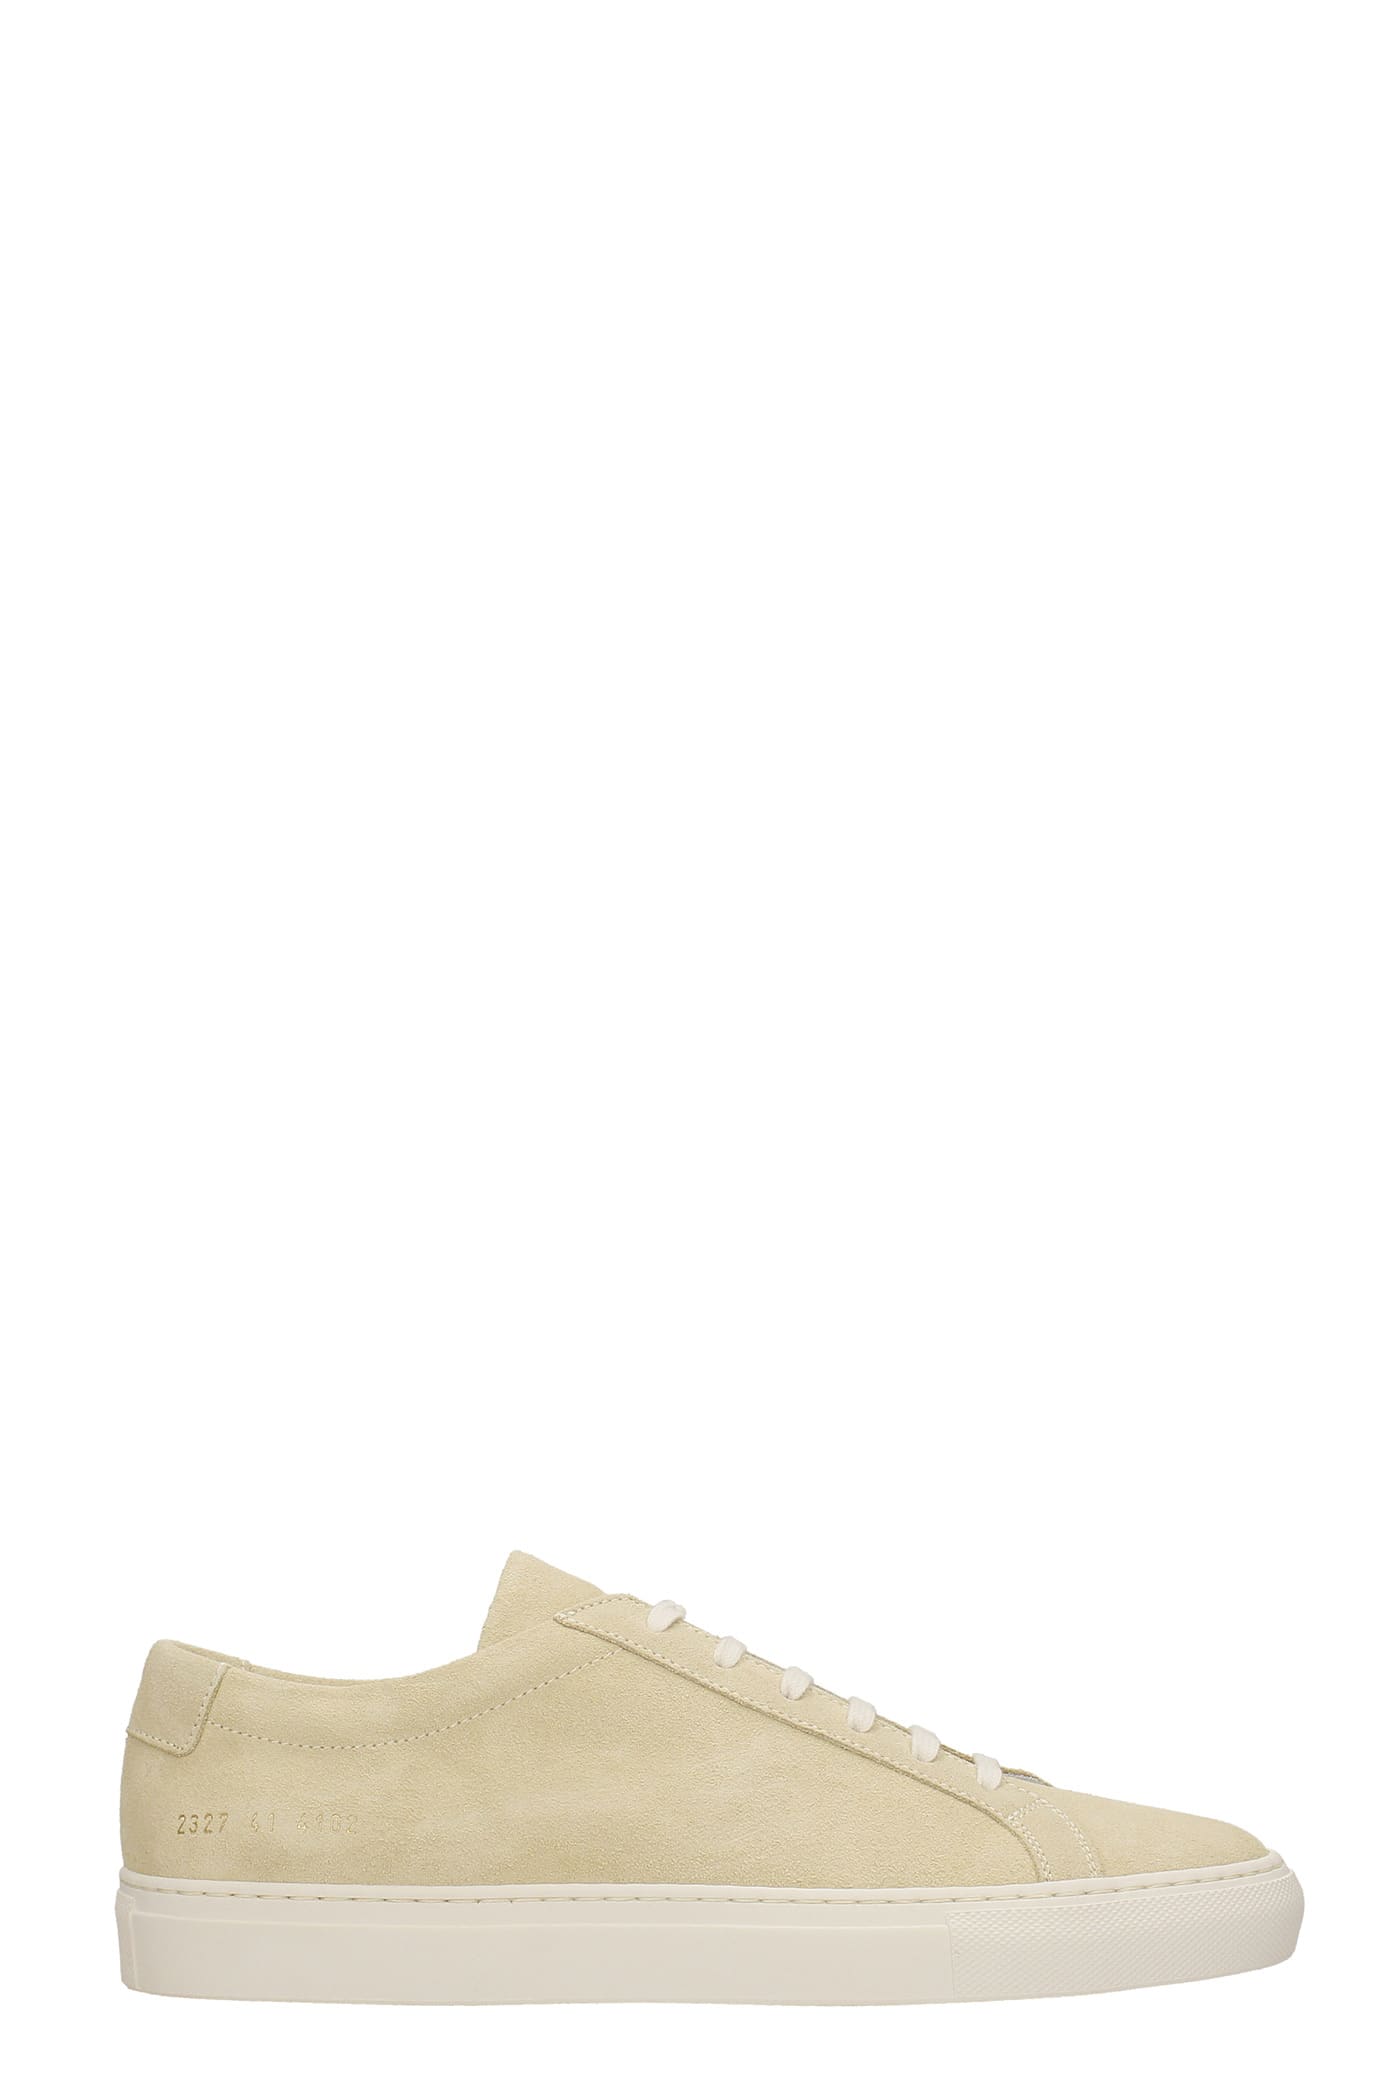 Common Projects Achille Sneakers In Beige Suede